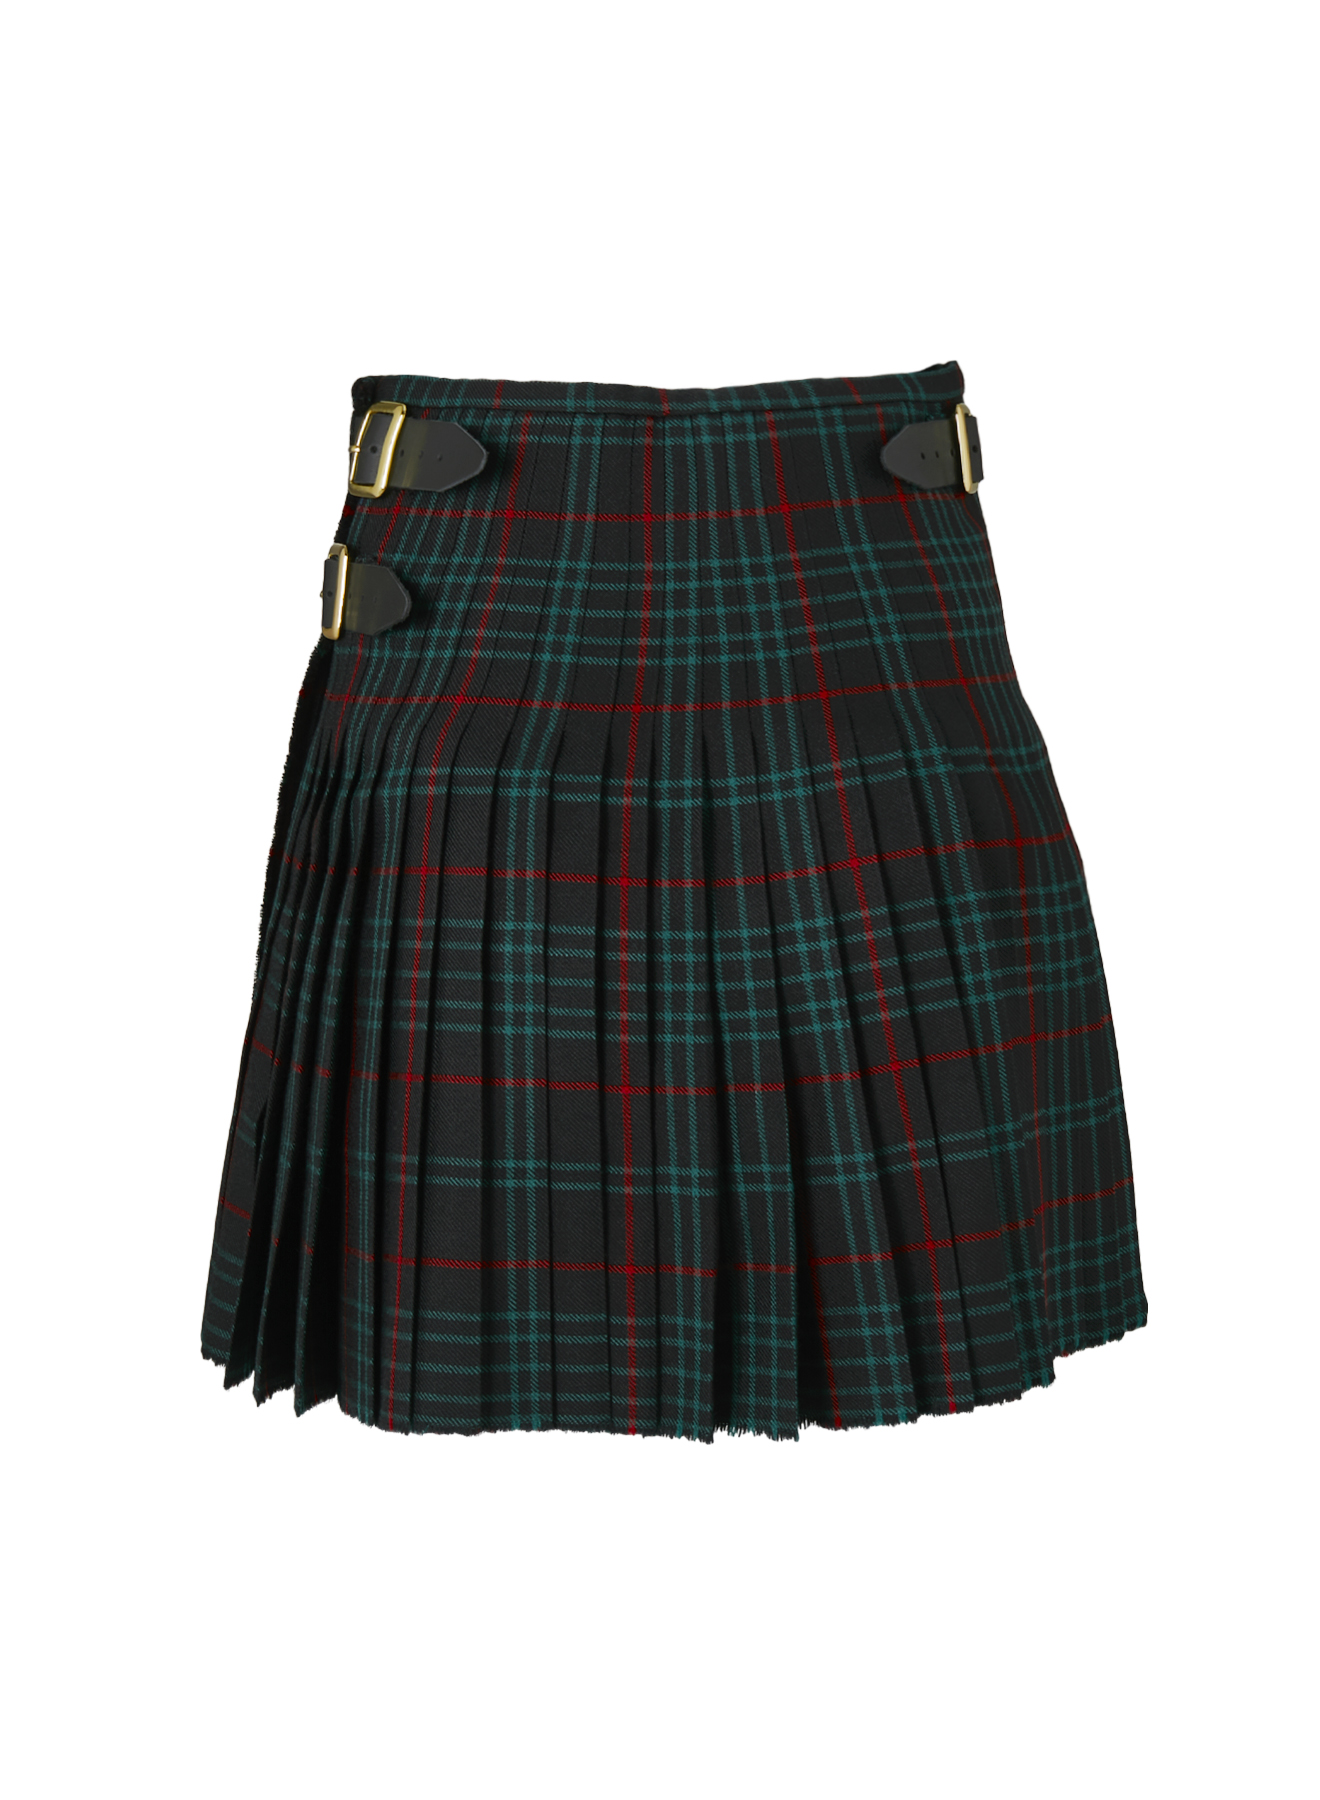 Vivienne Westwood's Iconic Kilts Arrive In Stores—Just In Time For Spring